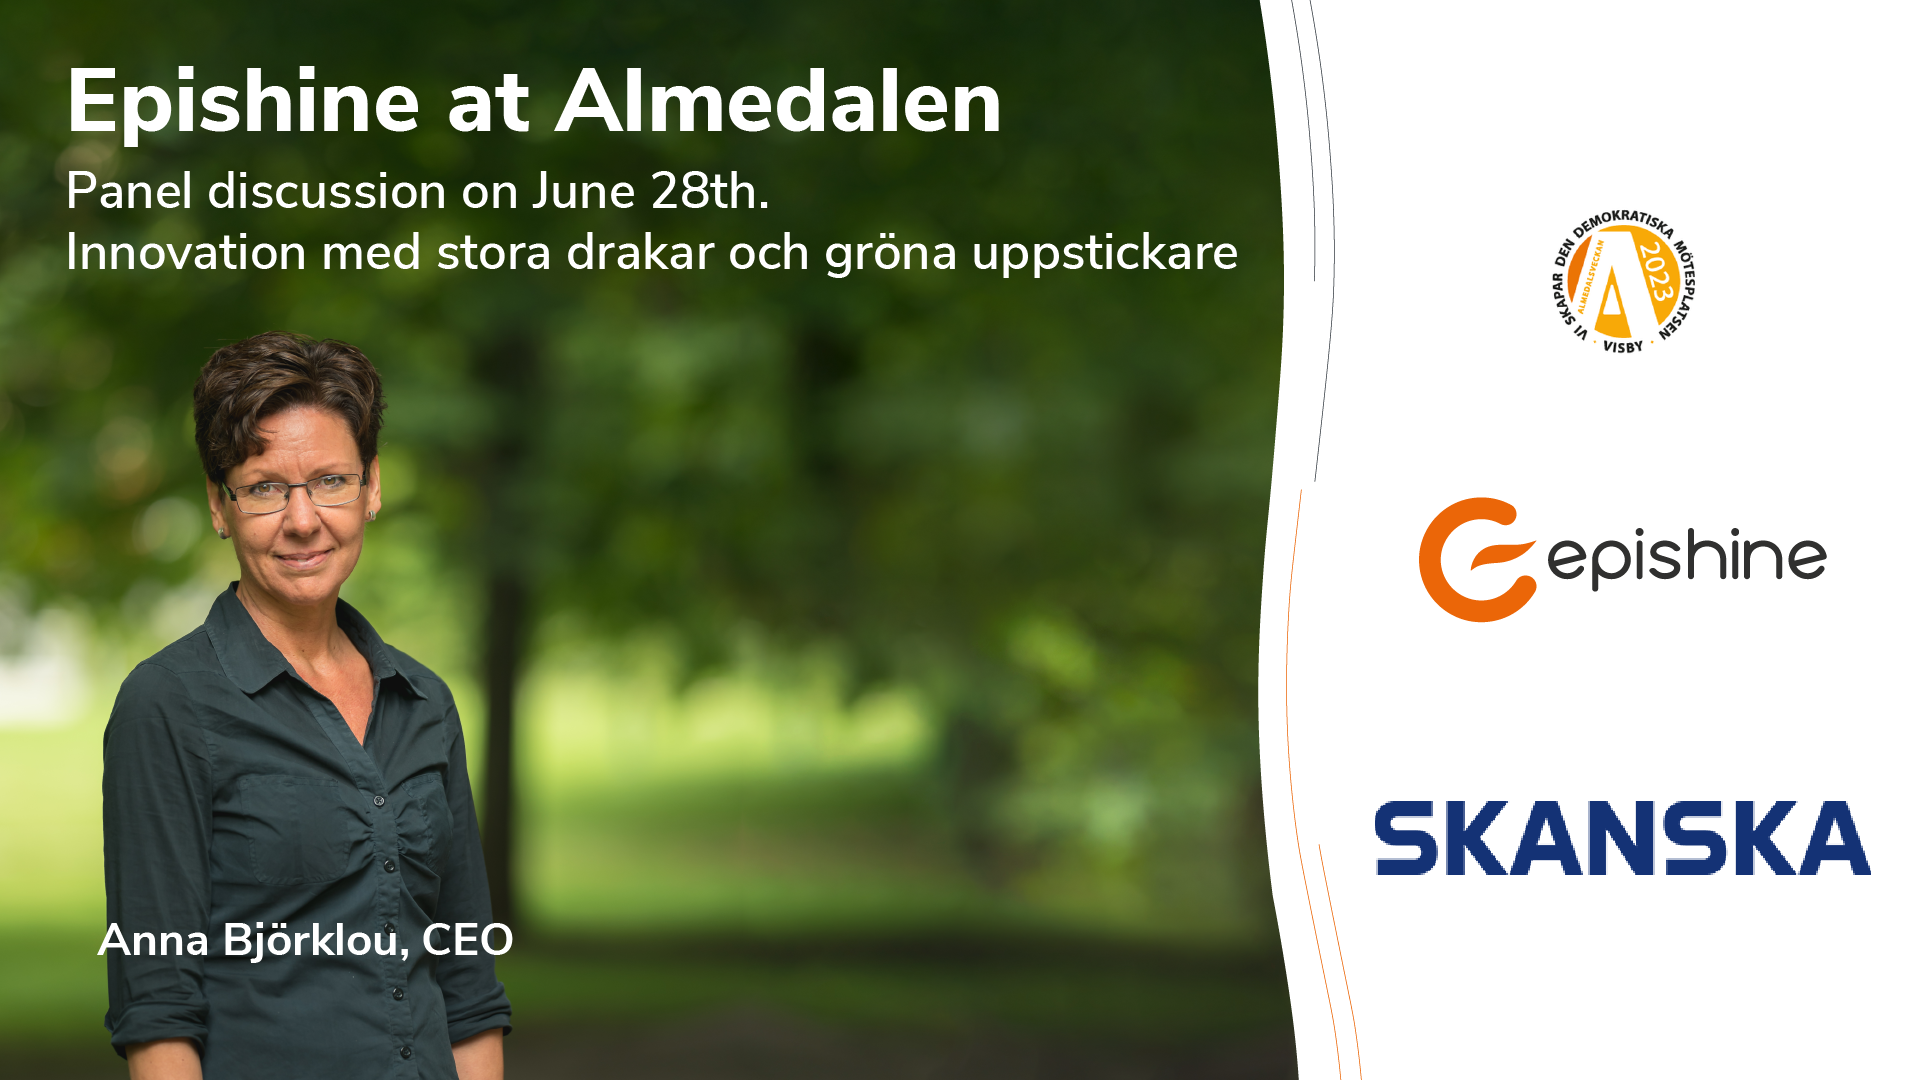 Epishine participates in the panel discussion on how large global companies and new upstarts can use innovation to move forward and meet societal challenges. The event is organized by Skanska and takes place in Almedalen on 28 June.